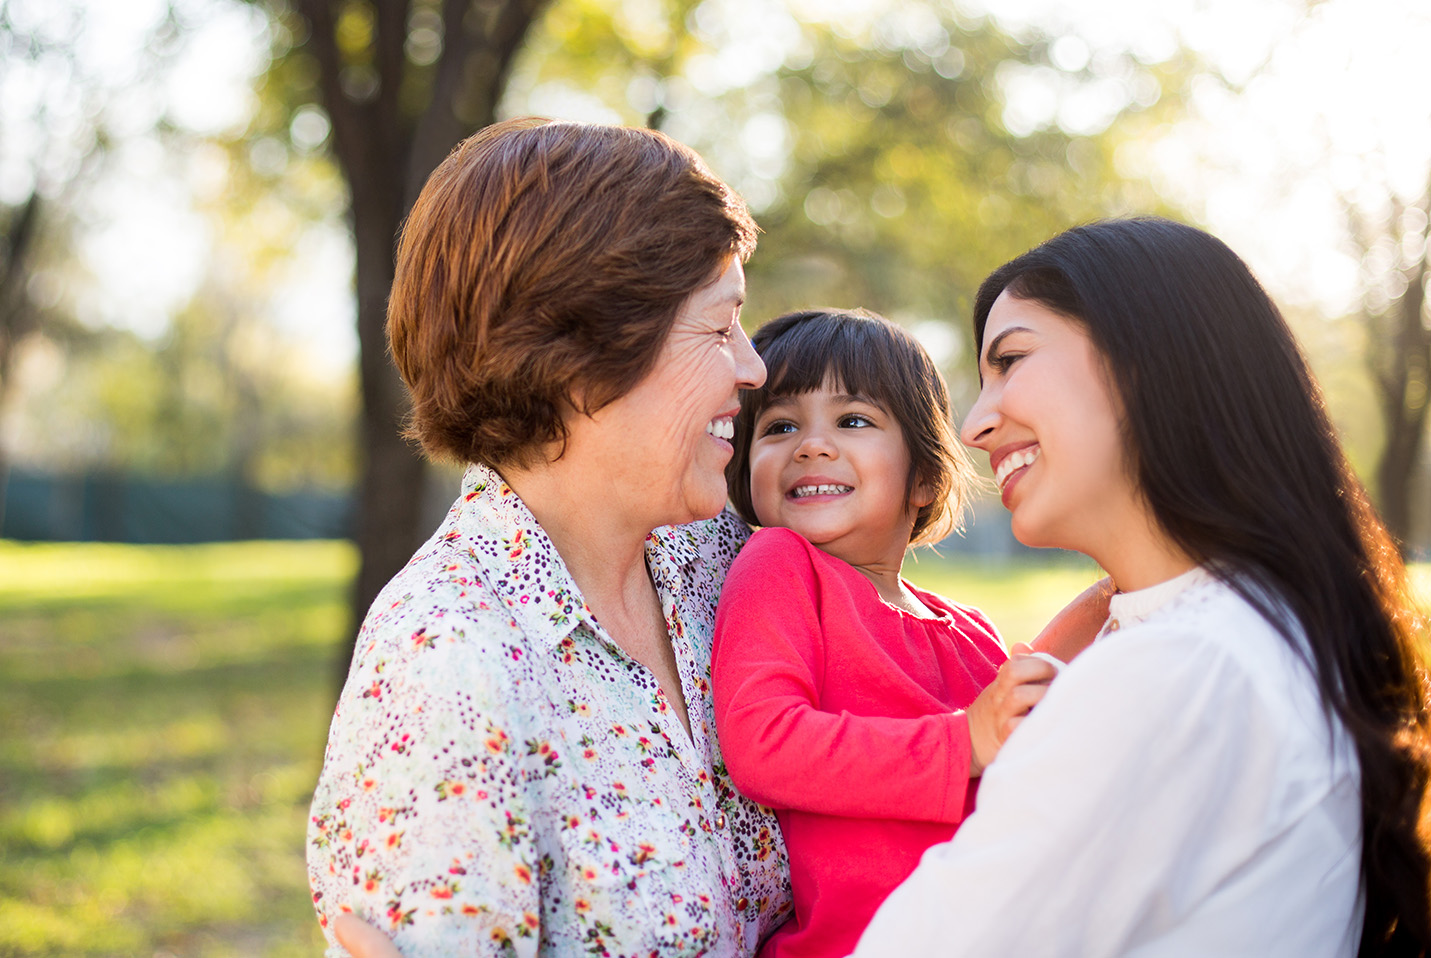 Three generations of a family share a joyous moment outdoors; an elderly woman with a floral shirt smiles at a young girl in red, who is held by a smiling young woman in white. The backdrop is a sunlit park with trees, suggesting a warm, familial atmosphere.